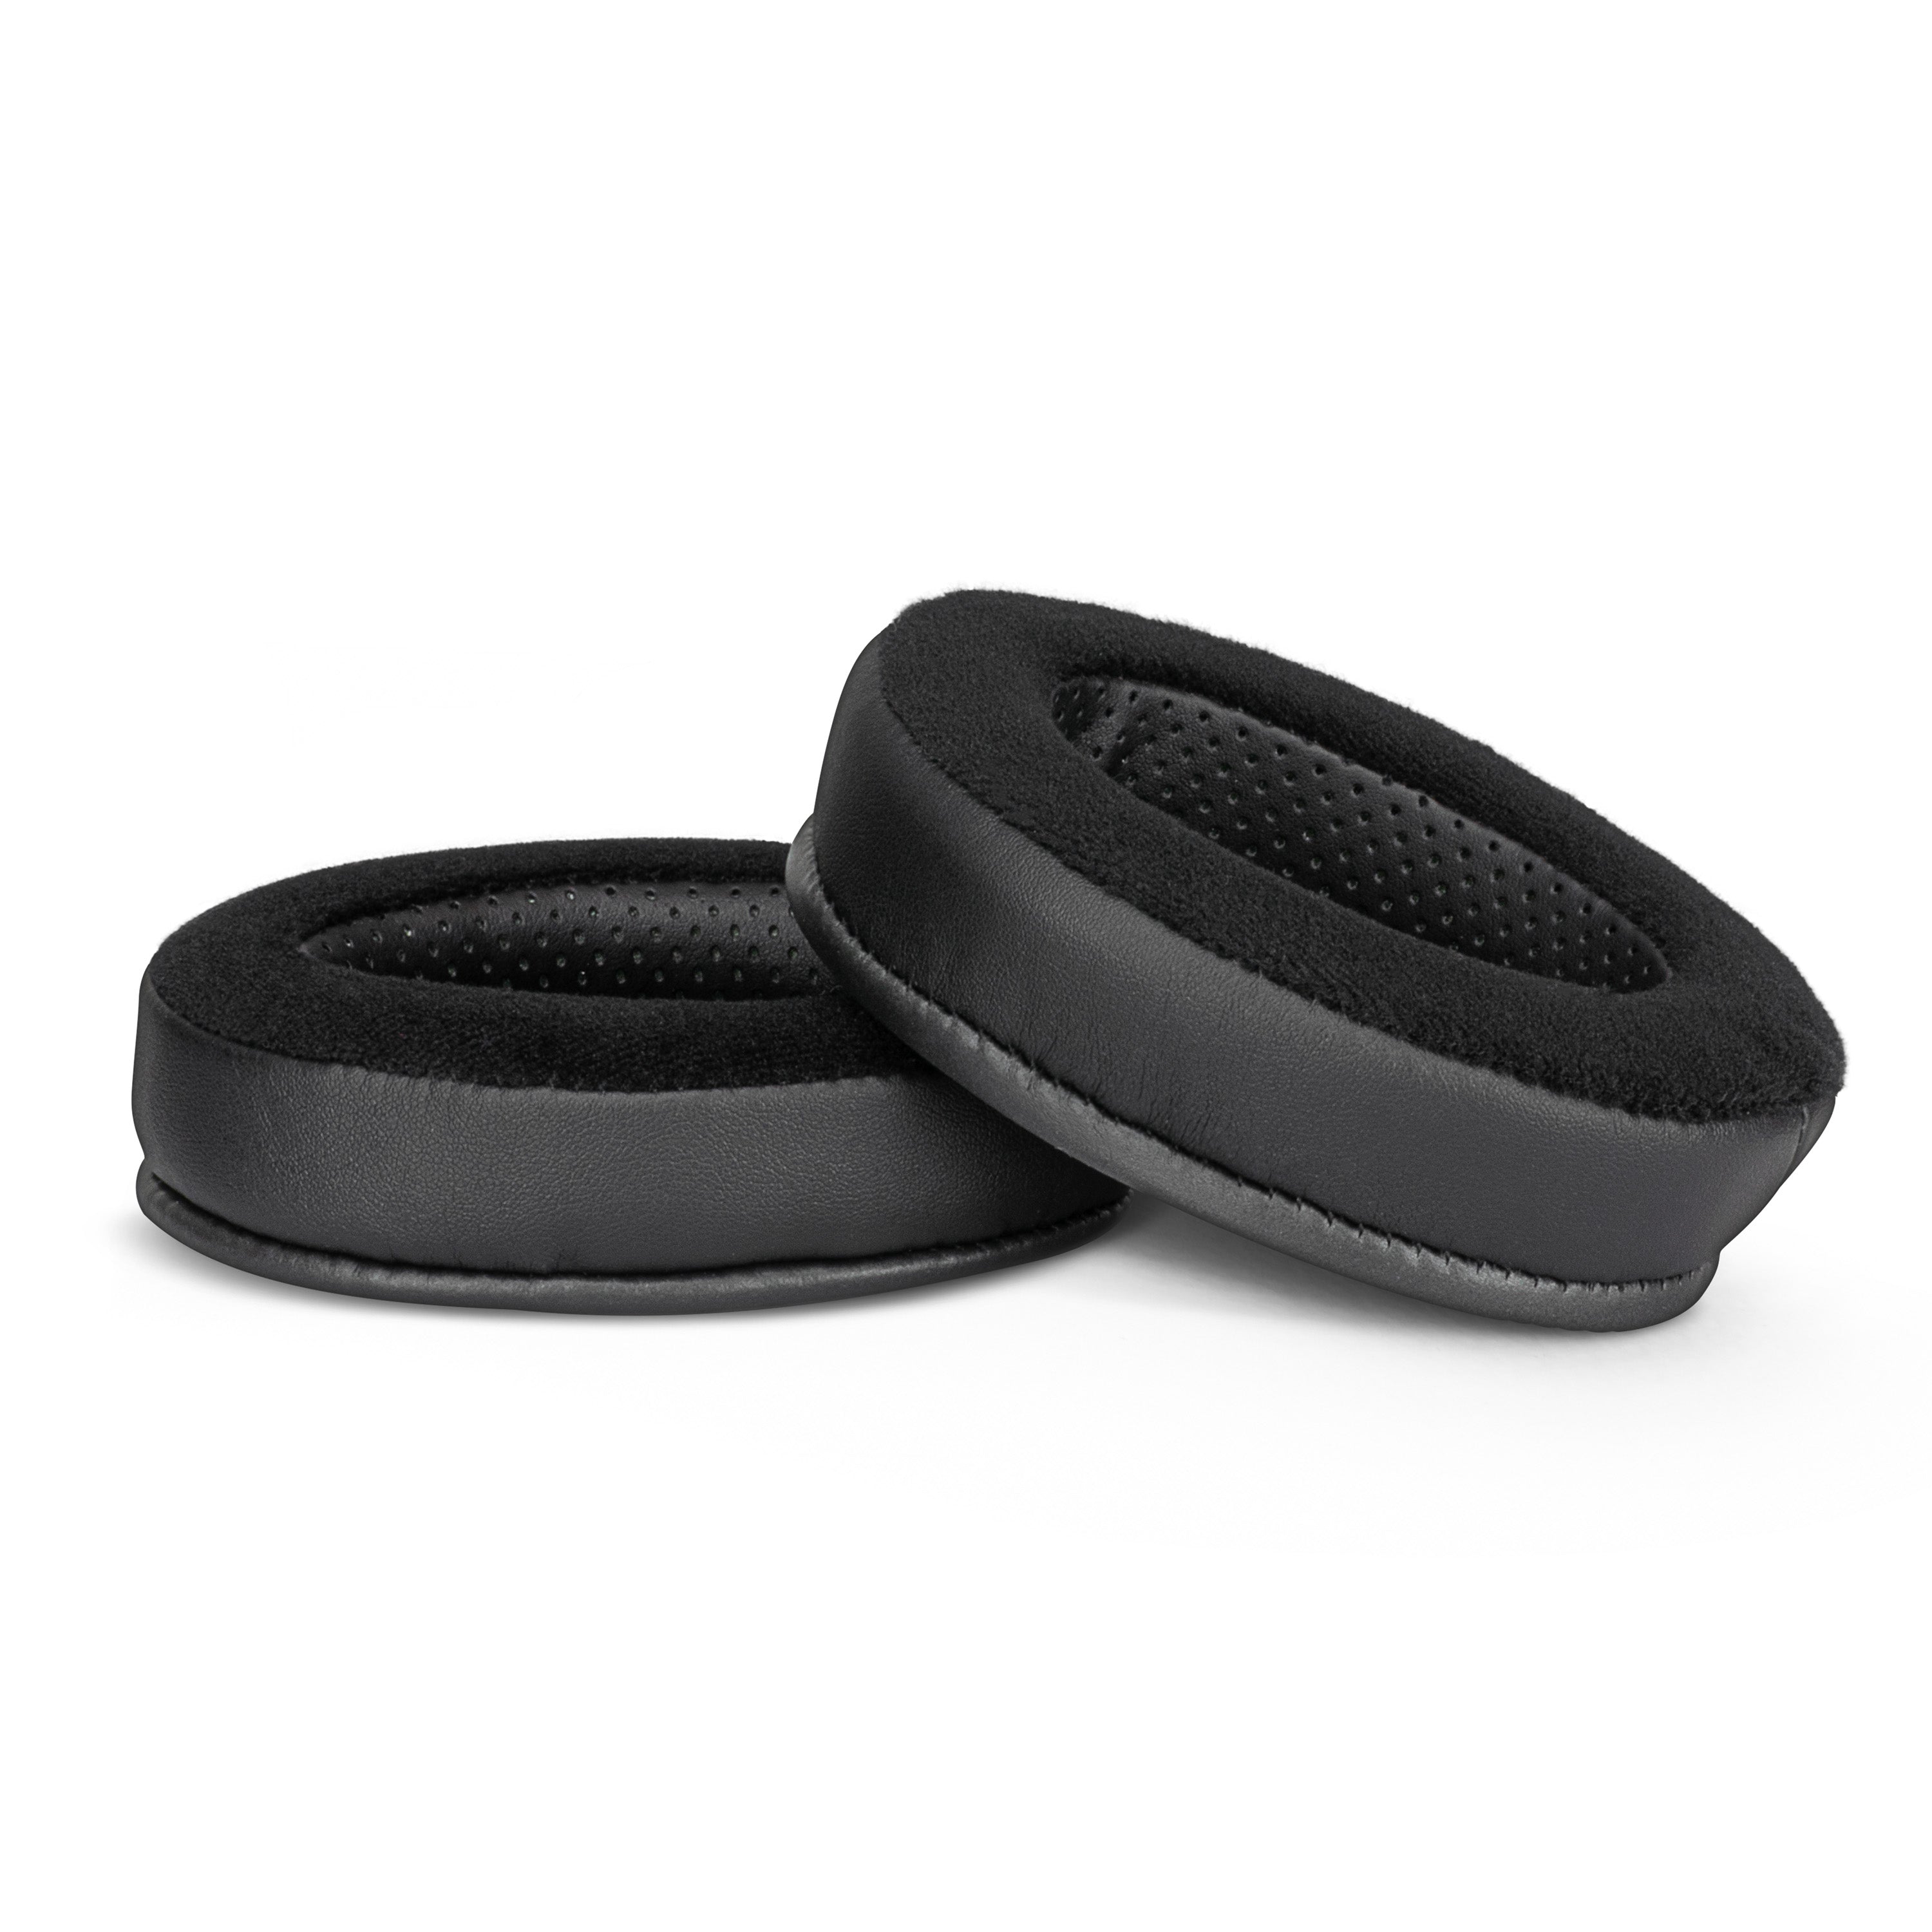 Upgraded Earpads for Gaming, With Cooling Gel, Memory foam & Micro Suede,  Ideal for Long Wearing, Oval, For Steelseries, HyperX, ATH-M50X & More -  Brainwavz Audio